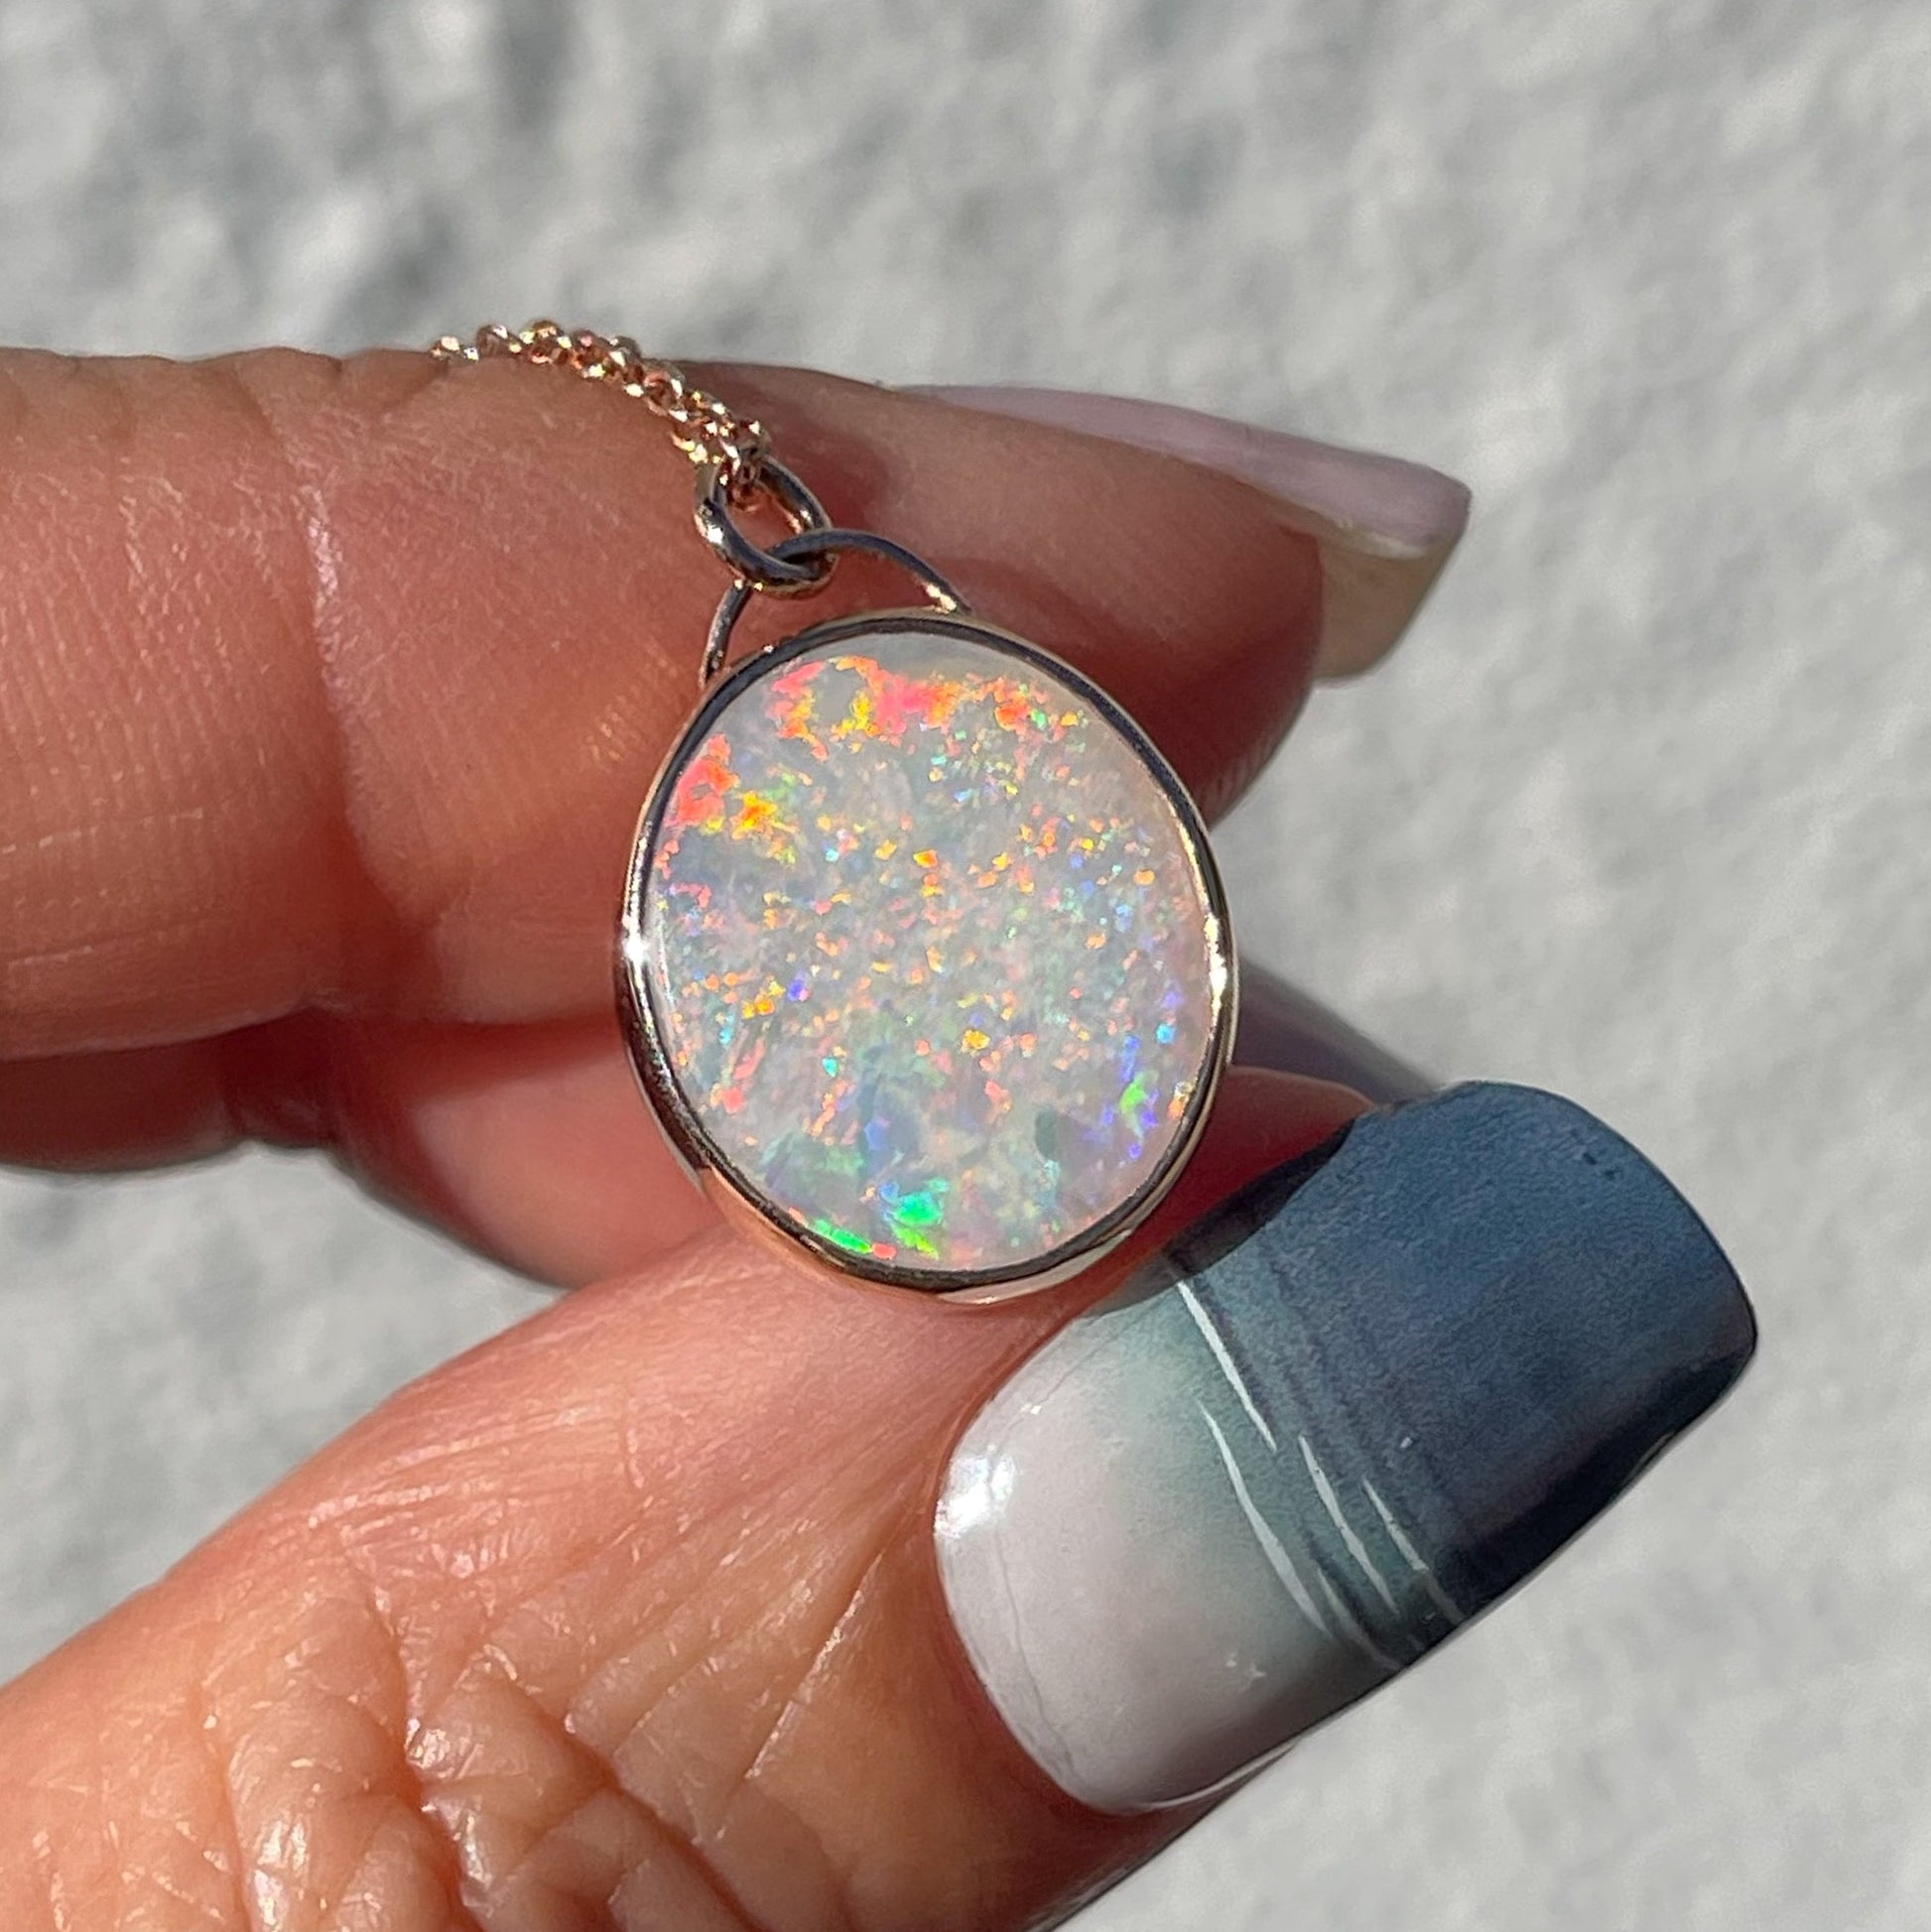 An Australian Opal Necklace by NIXIN Jewelry with a Coober Pedy Opal set in a rose gold. The Australian Opal Pendant is held up in the sunlight.